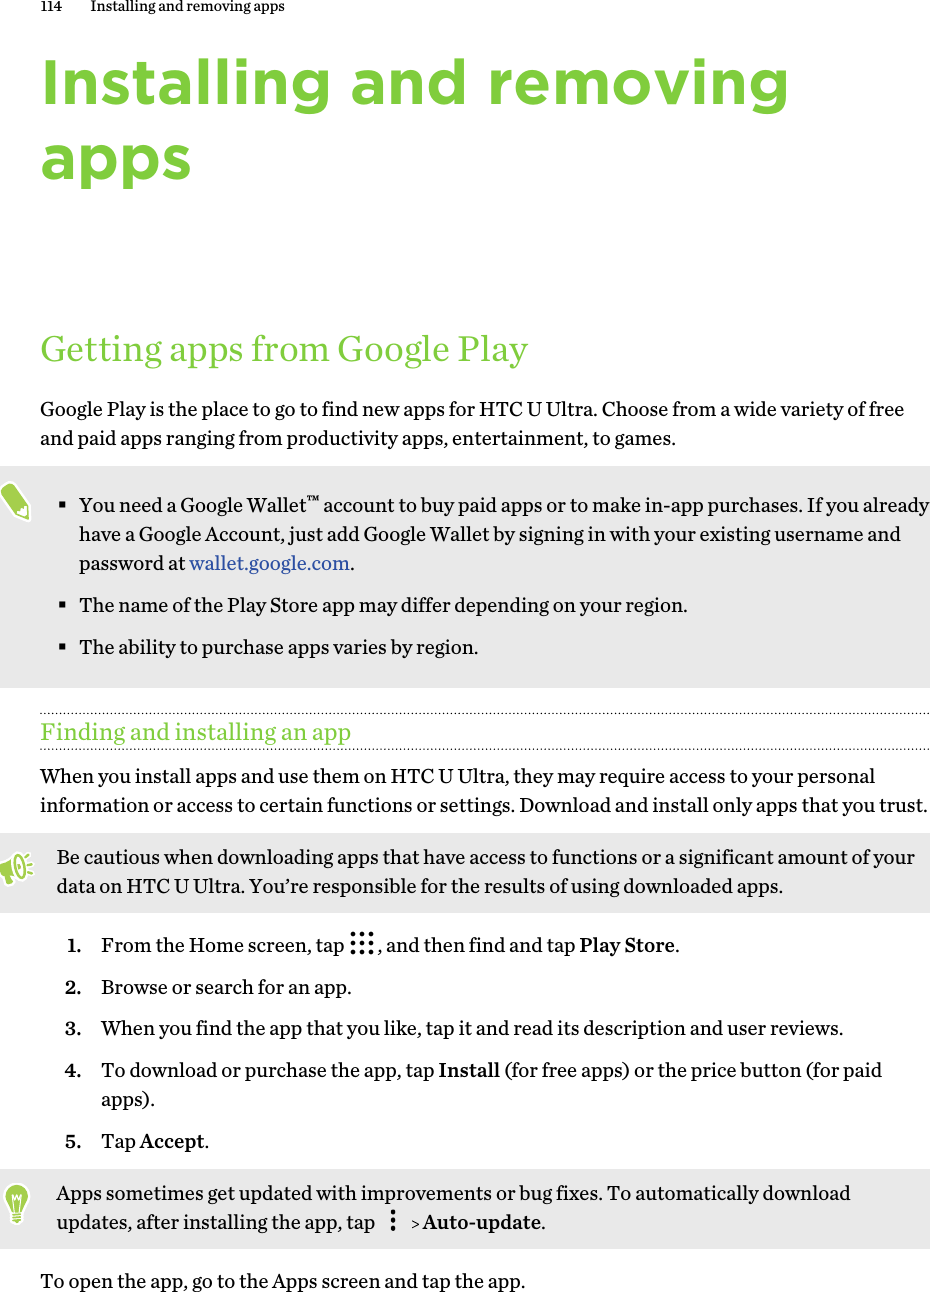 Installing and removingappsGetting apps from Google PlayGoogle Play is the place to go to find new apps for HTC U Ultra. Choose from a wide variety of freeand paid apps ranging from productivity apps, entertainment, to games.§You need a Google Wallet™ account to buy paid apps or to make in-app purchases. If you alreadyhave a Google Account, just add Google Wallet by signing in with your existing username andpassword at wallet.google.com.§The name of the Play Store app may differ depending on your region.§The ability to purchase apps varies by region.Finding and installing an appWhen you install apps and use them on HTC U Ultra, they may require access to your personalinformation or access to certain functions or settings. Download and install only apps that you trust.Be cautious when downloading apps that have access to functions or a significant amount of yourdata on HTC U Ultra. You’re responsible for the results of using downloaded apps.1. From the Home screen, tap  , and then find and tap Play Store.2. Browse or search for an app.3. When you find the app that you like, tap it and read its description and user reviews.4. To download or purchase the app, tap Install (for free apps) or the price button (for paidapps).5. Tap Accept. Apps sometimes get updated with improvements or bug fixes. To automatically downloadupdates, after installing the app, tap     Auto-update.To open the app, go to the Apps screen and tap the app.114 Installing and removing apps